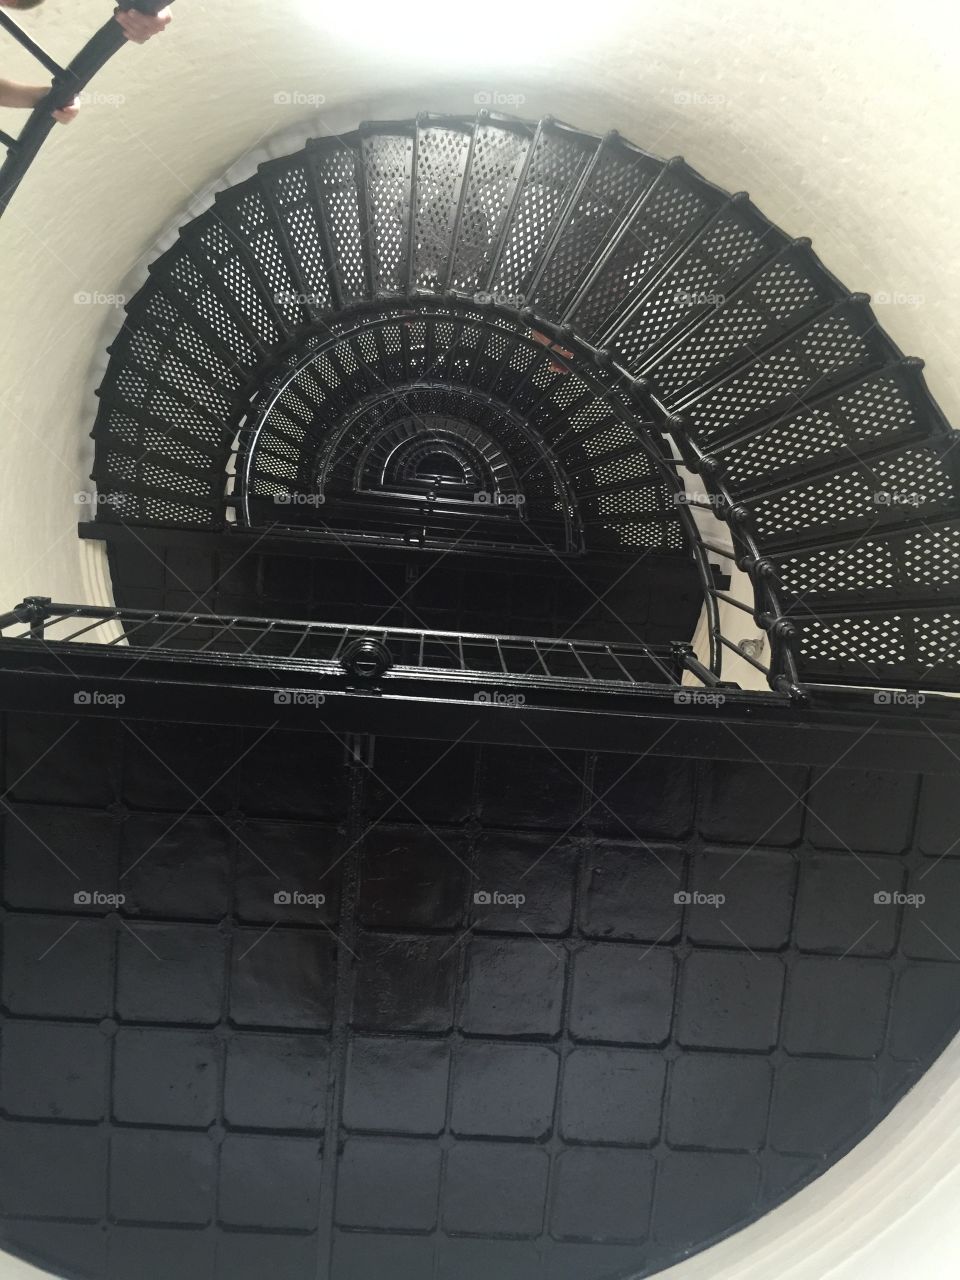 Ocracoke Lighthouse Stairs . The stairs inside the Ocracoke Lighthouse in the Outer Banks 